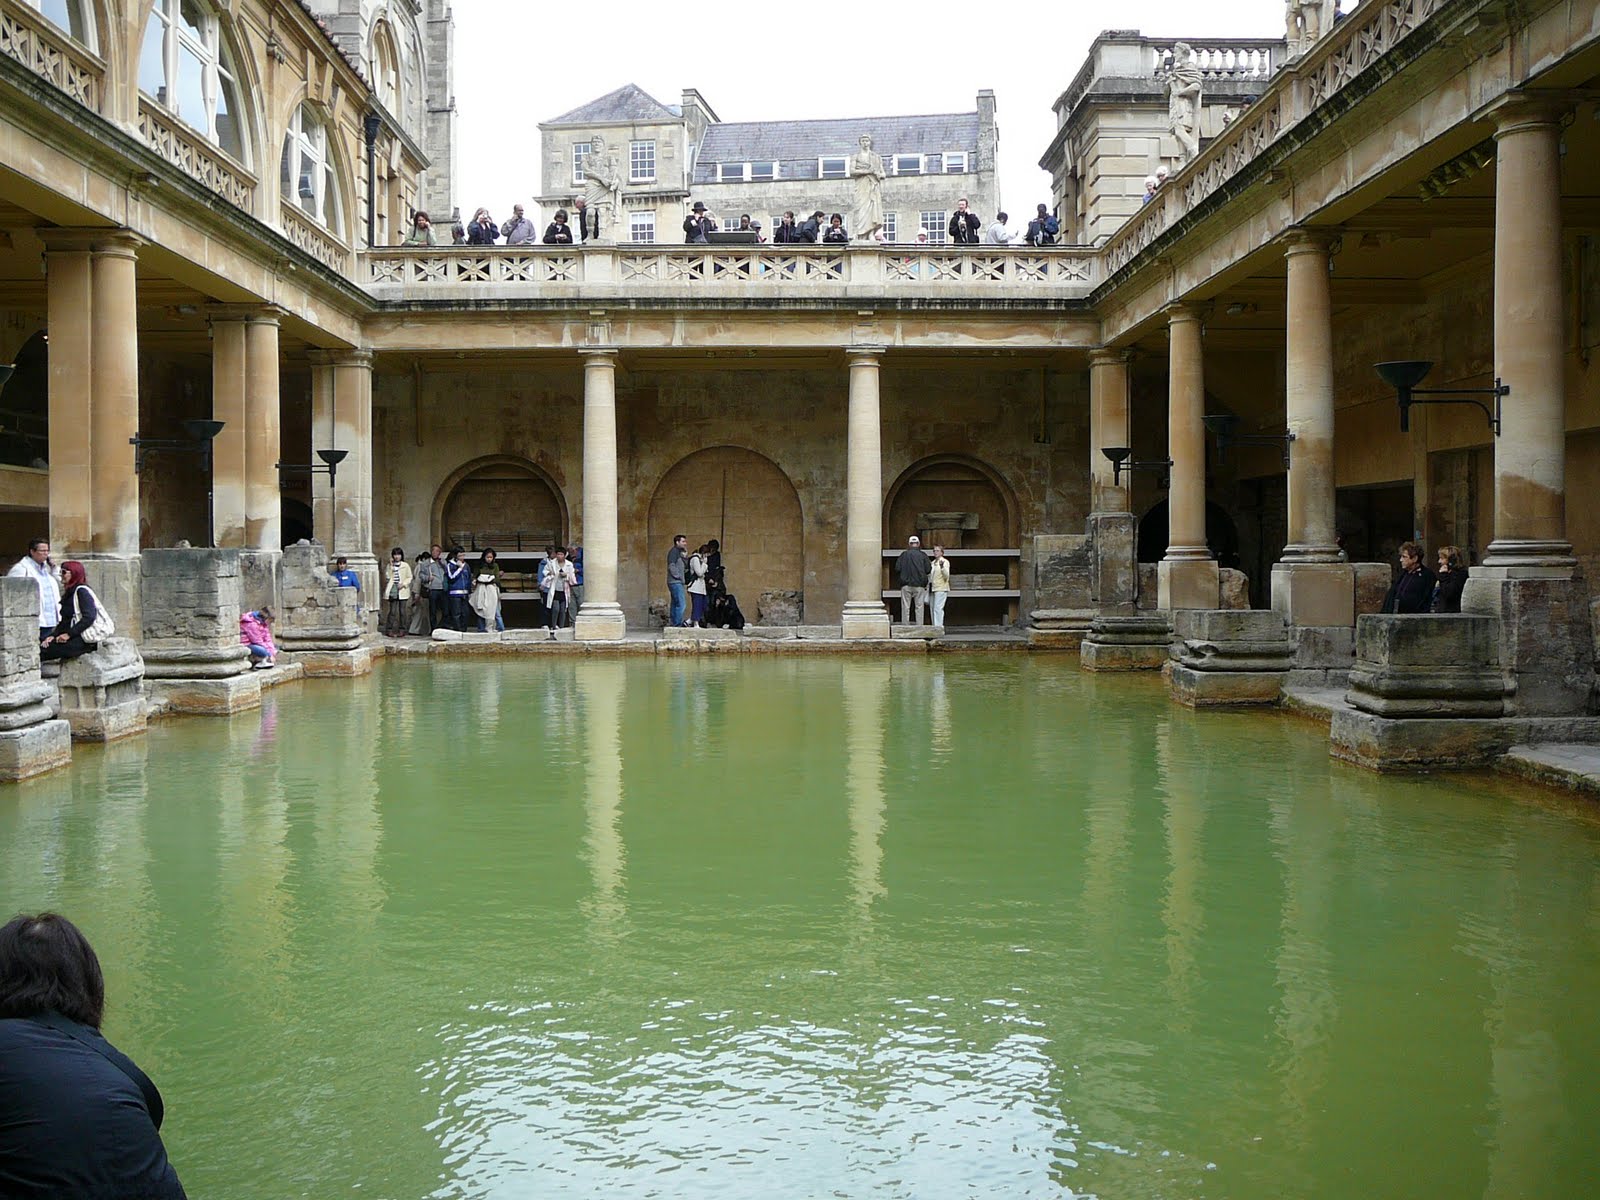 Bath the historic city in somerset. The Roman Baths and Georgian City of Bath, Somerset. Roman Baths. Город бат. Remains of the Roman Baths at Bath, England..